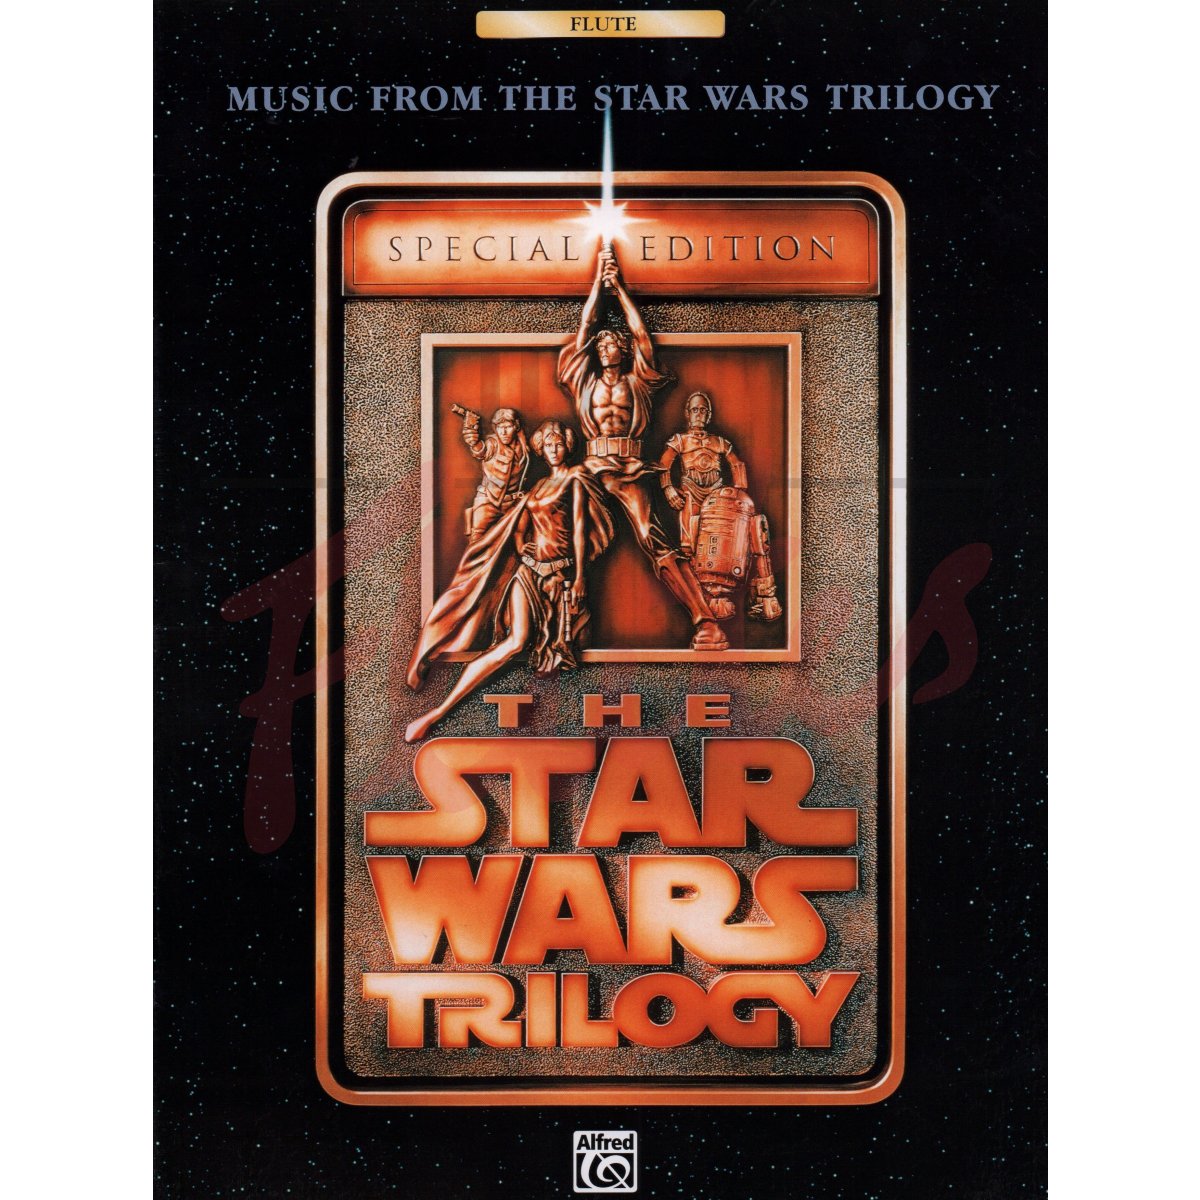 The Star Wars Trilogy for Flute